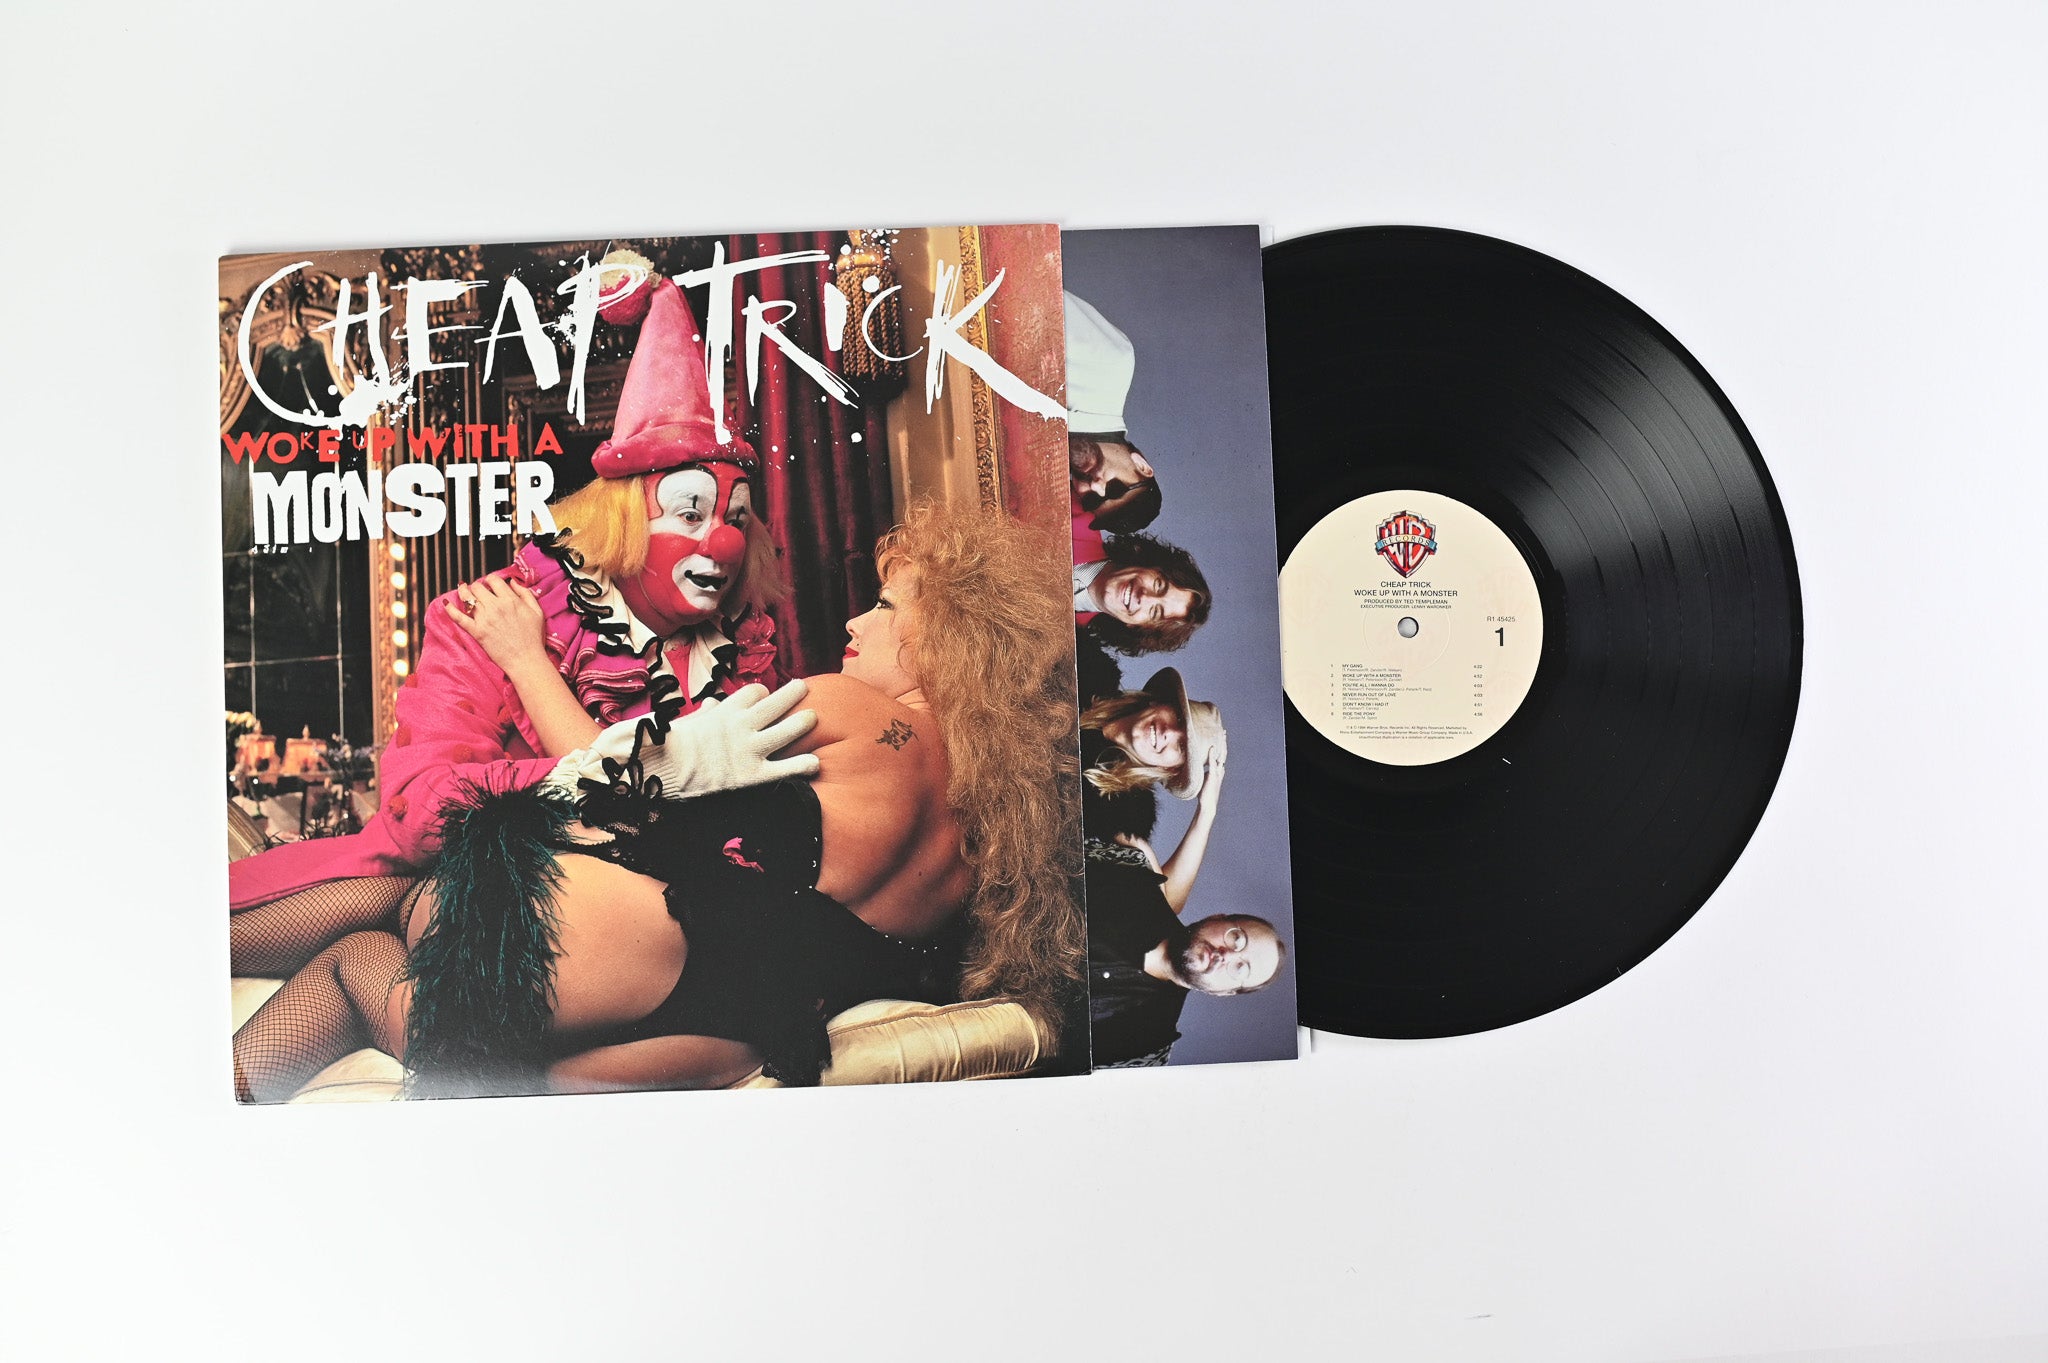 Cheap Trick - Woke Up With A Monster Reissue on Warner Bros. Records